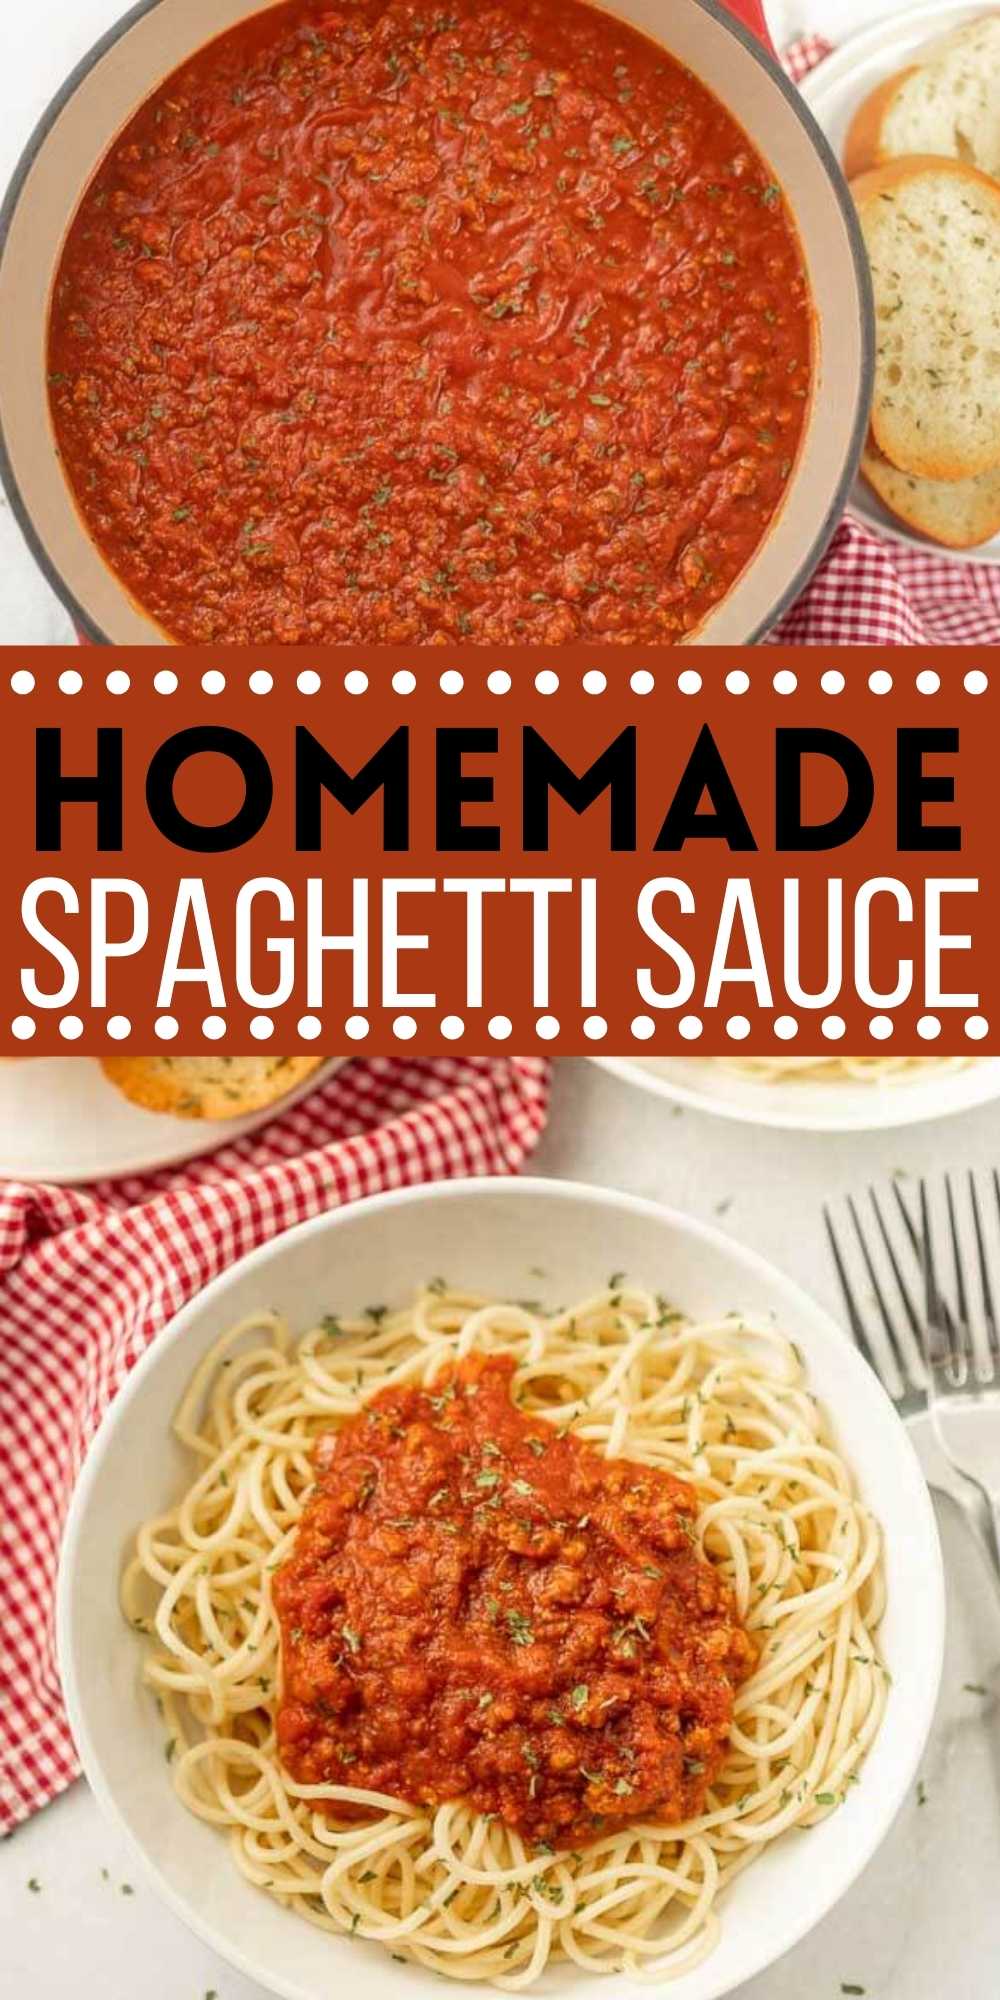 This Easy Homemade Spaghetti Sauce Recipe from scratch can be made on a stove top in under an hour. This homemade spaghettis meat sauce is the easiest Italian spaghetti sauce recipe that your entire family will love.  #eatingonadime #italianrecipes #pastarecipes #spaghettirecipes 
